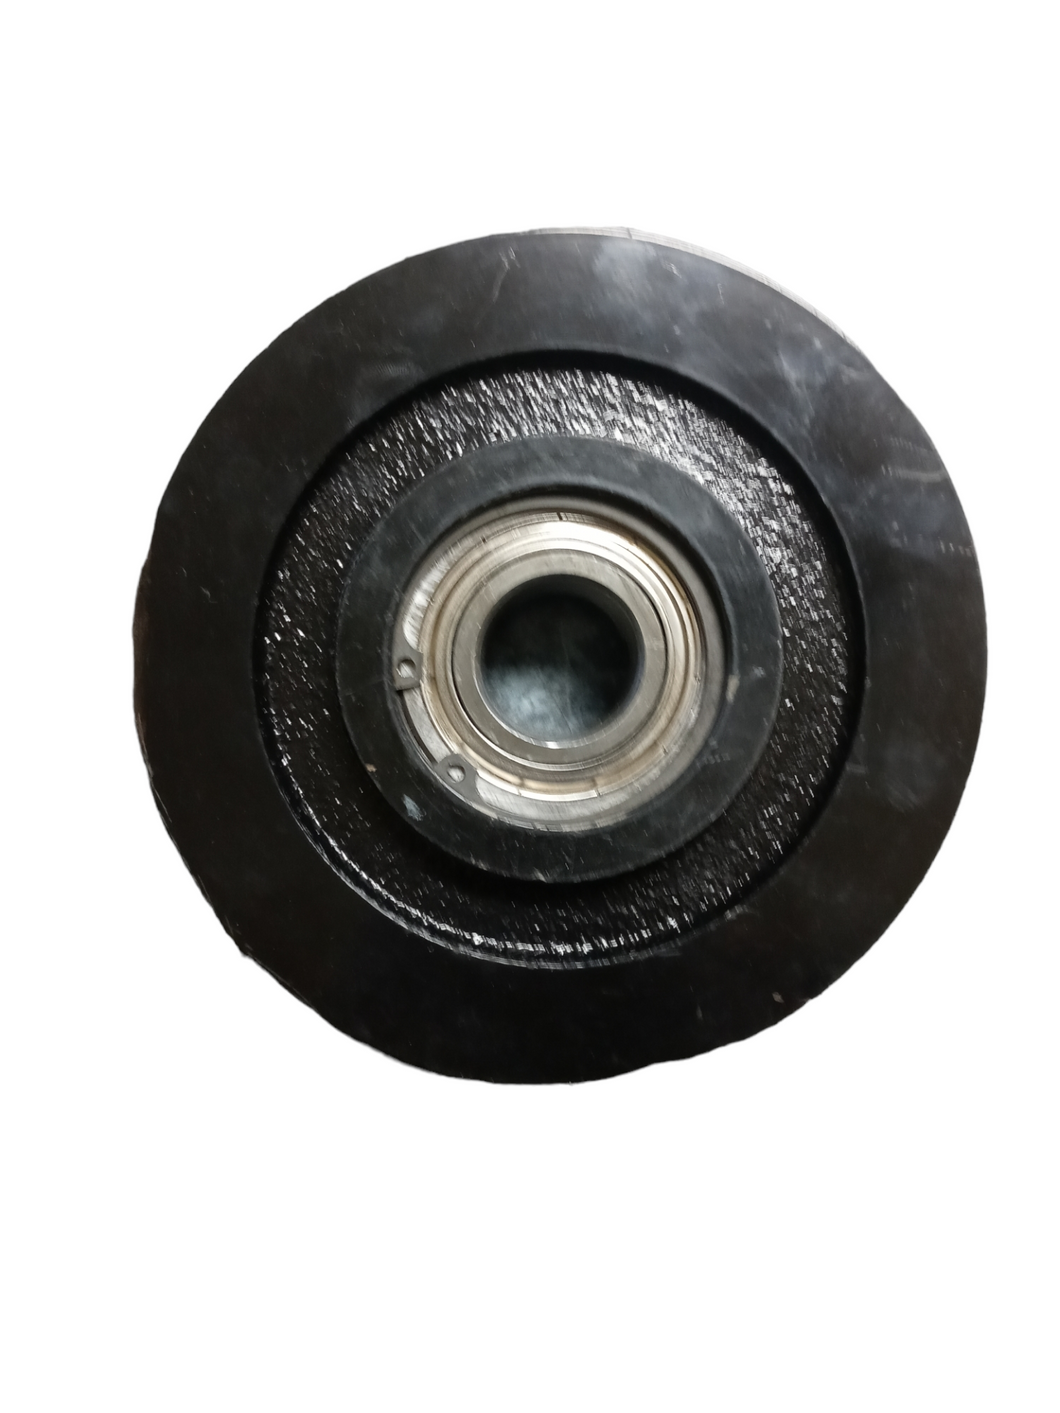 SINGLE GROOVE SHEAVE 540072 PULLEY, ID: 1-3/16